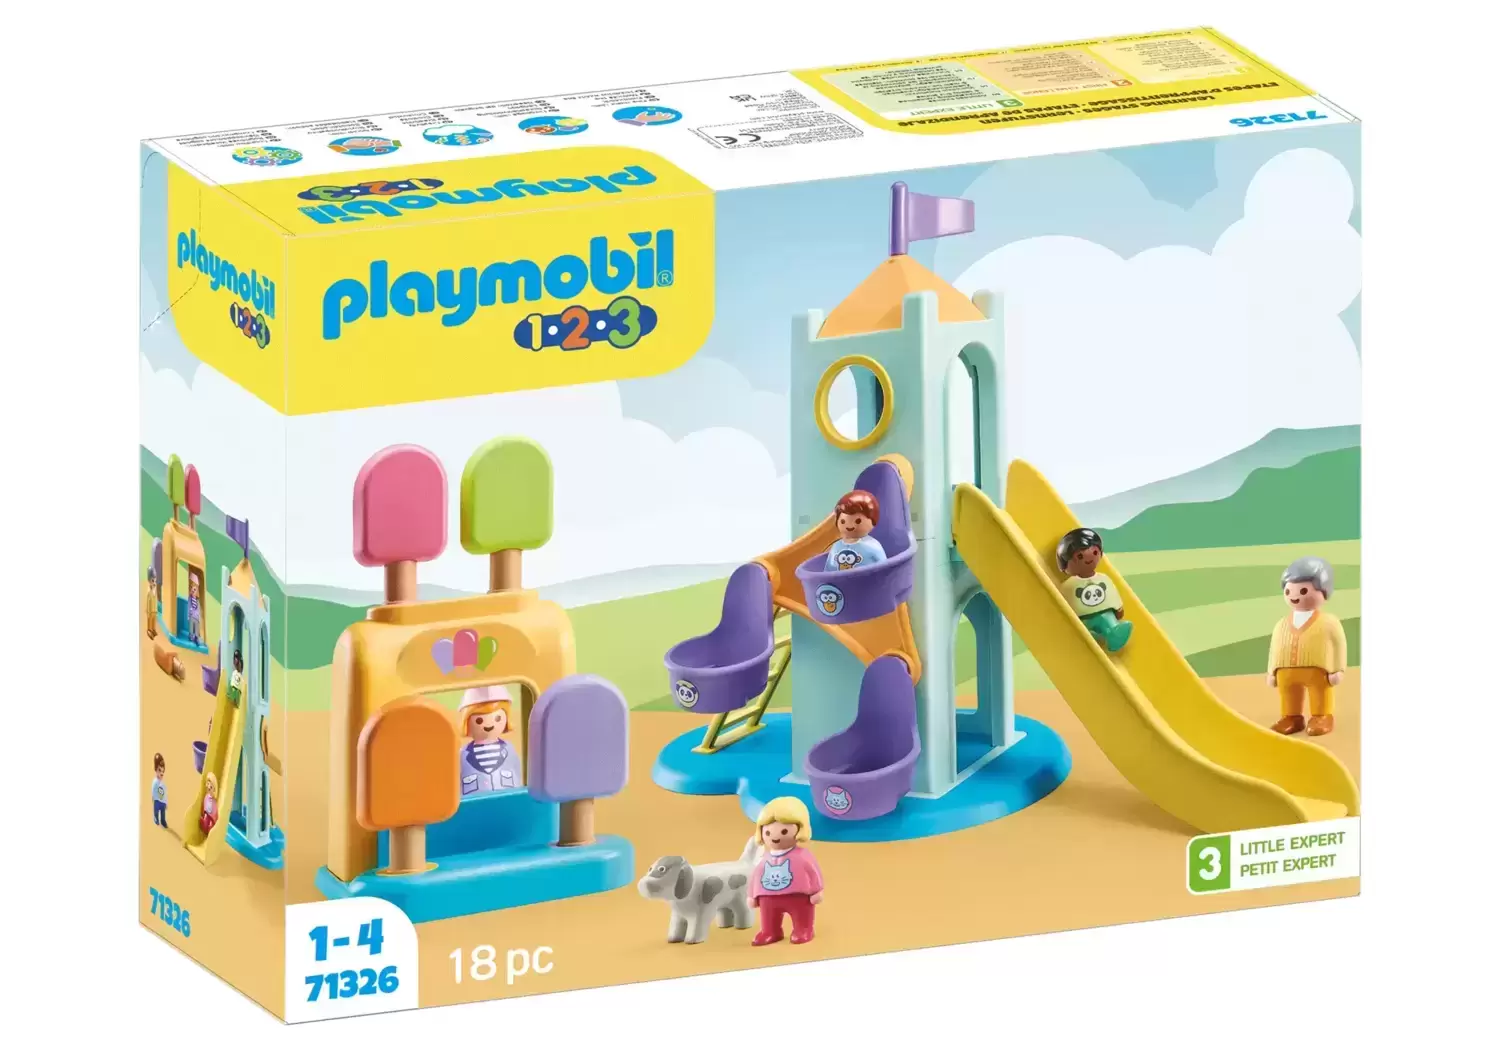 Playmobil 1.2.3 - 1.2.3: Adventure Tower with Ice Cream Booth